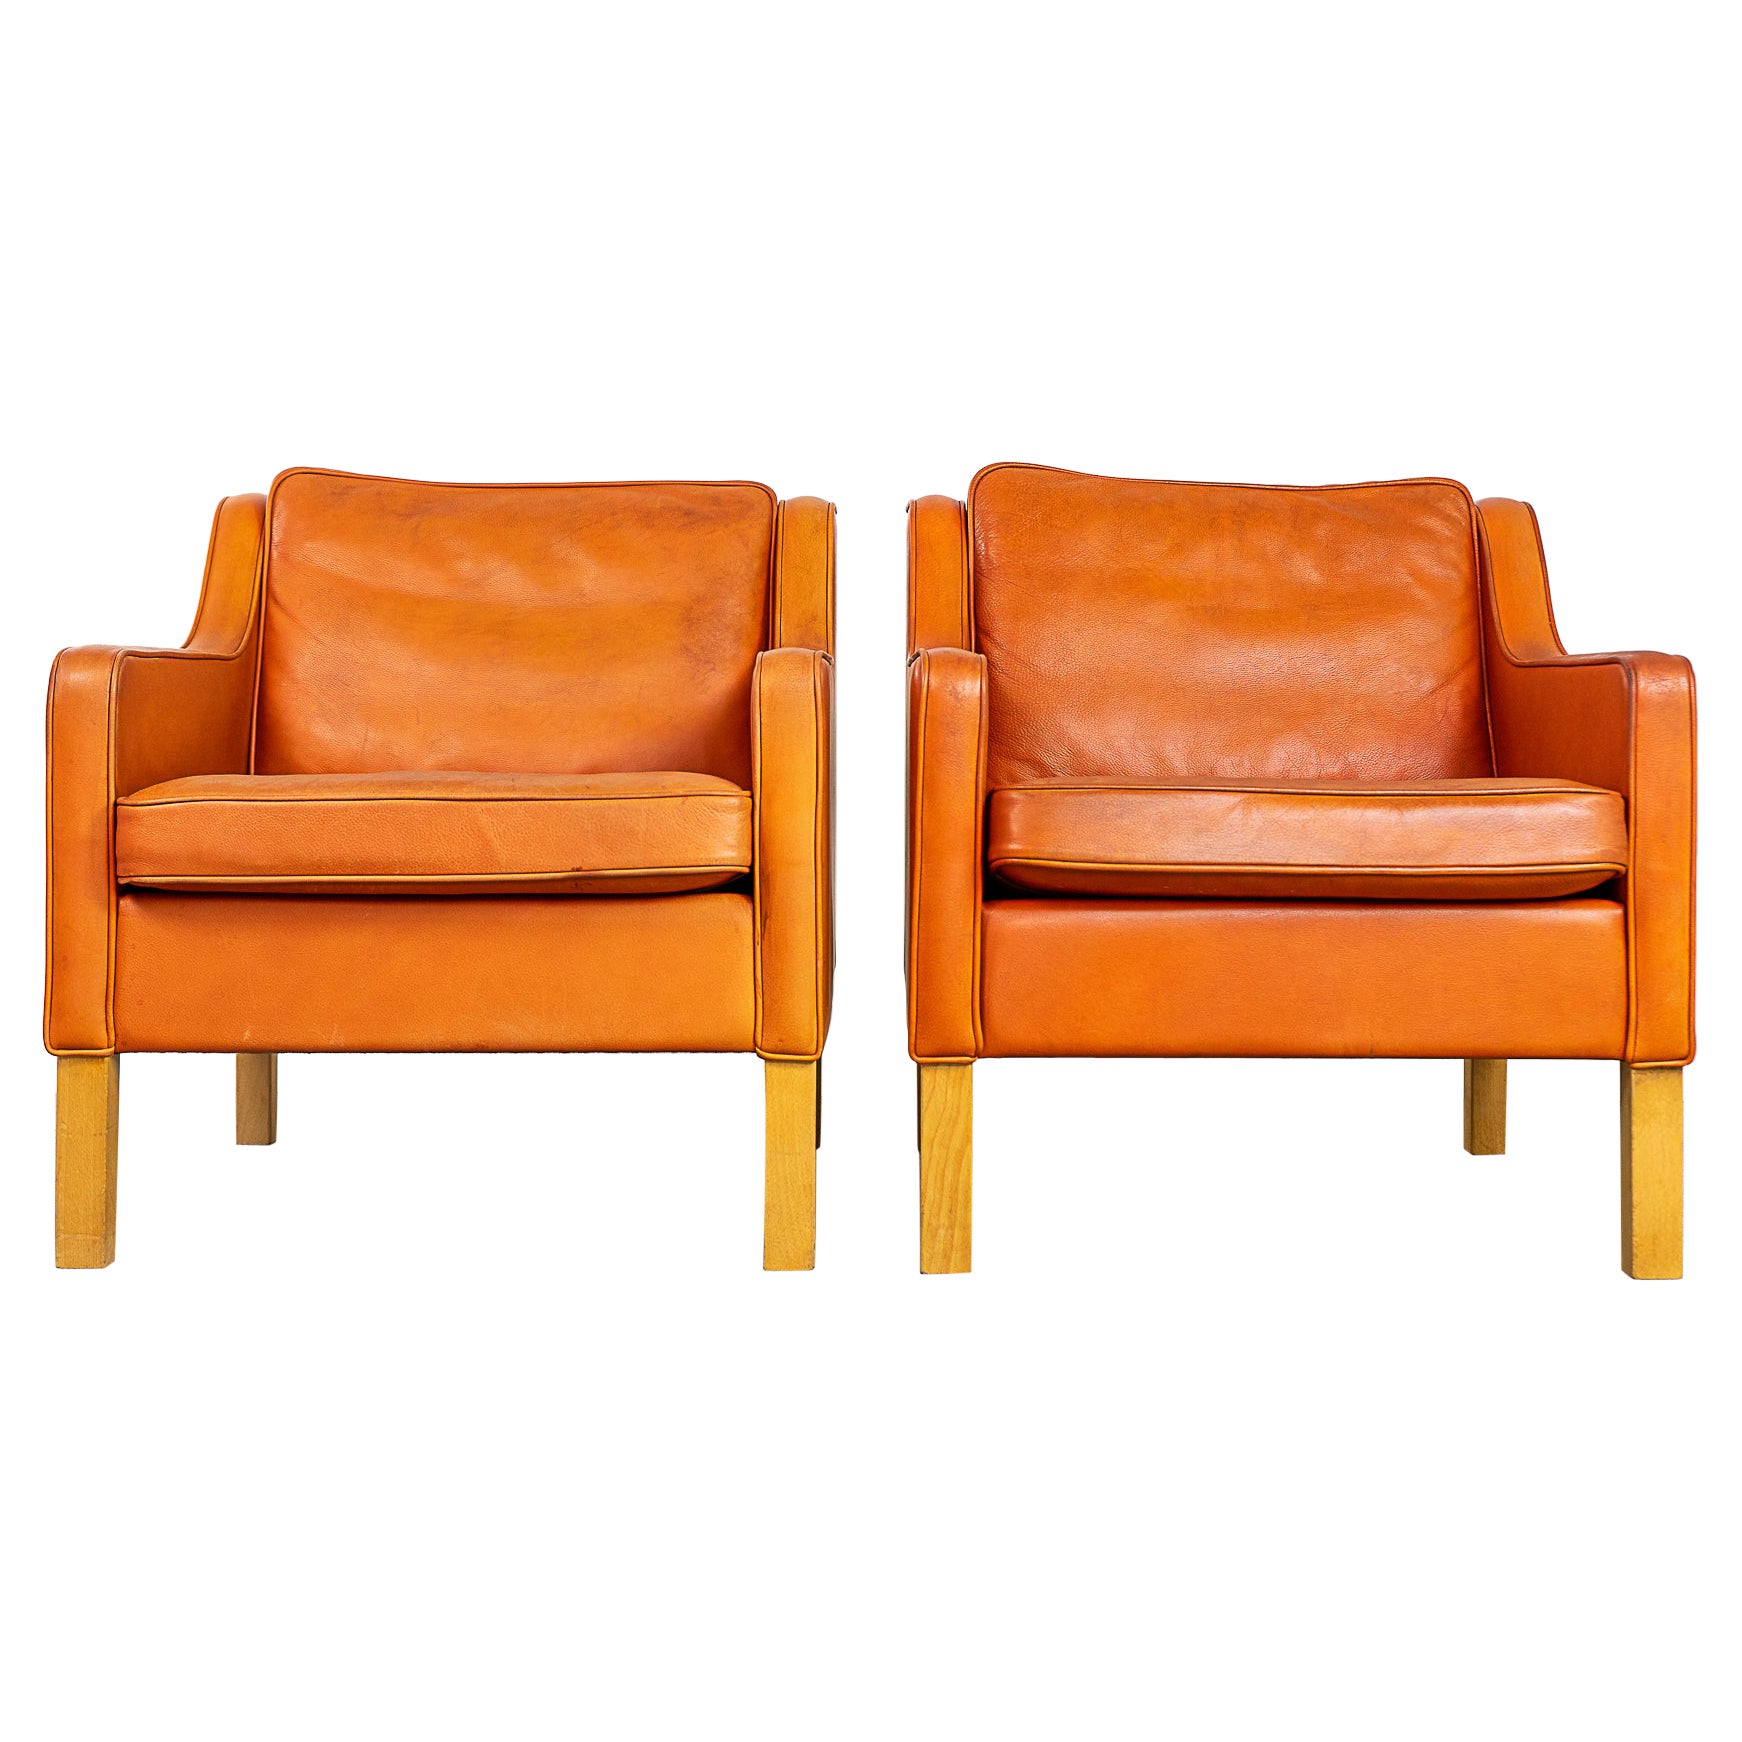 Pair of Danish Modern Leather Lounge Chairs